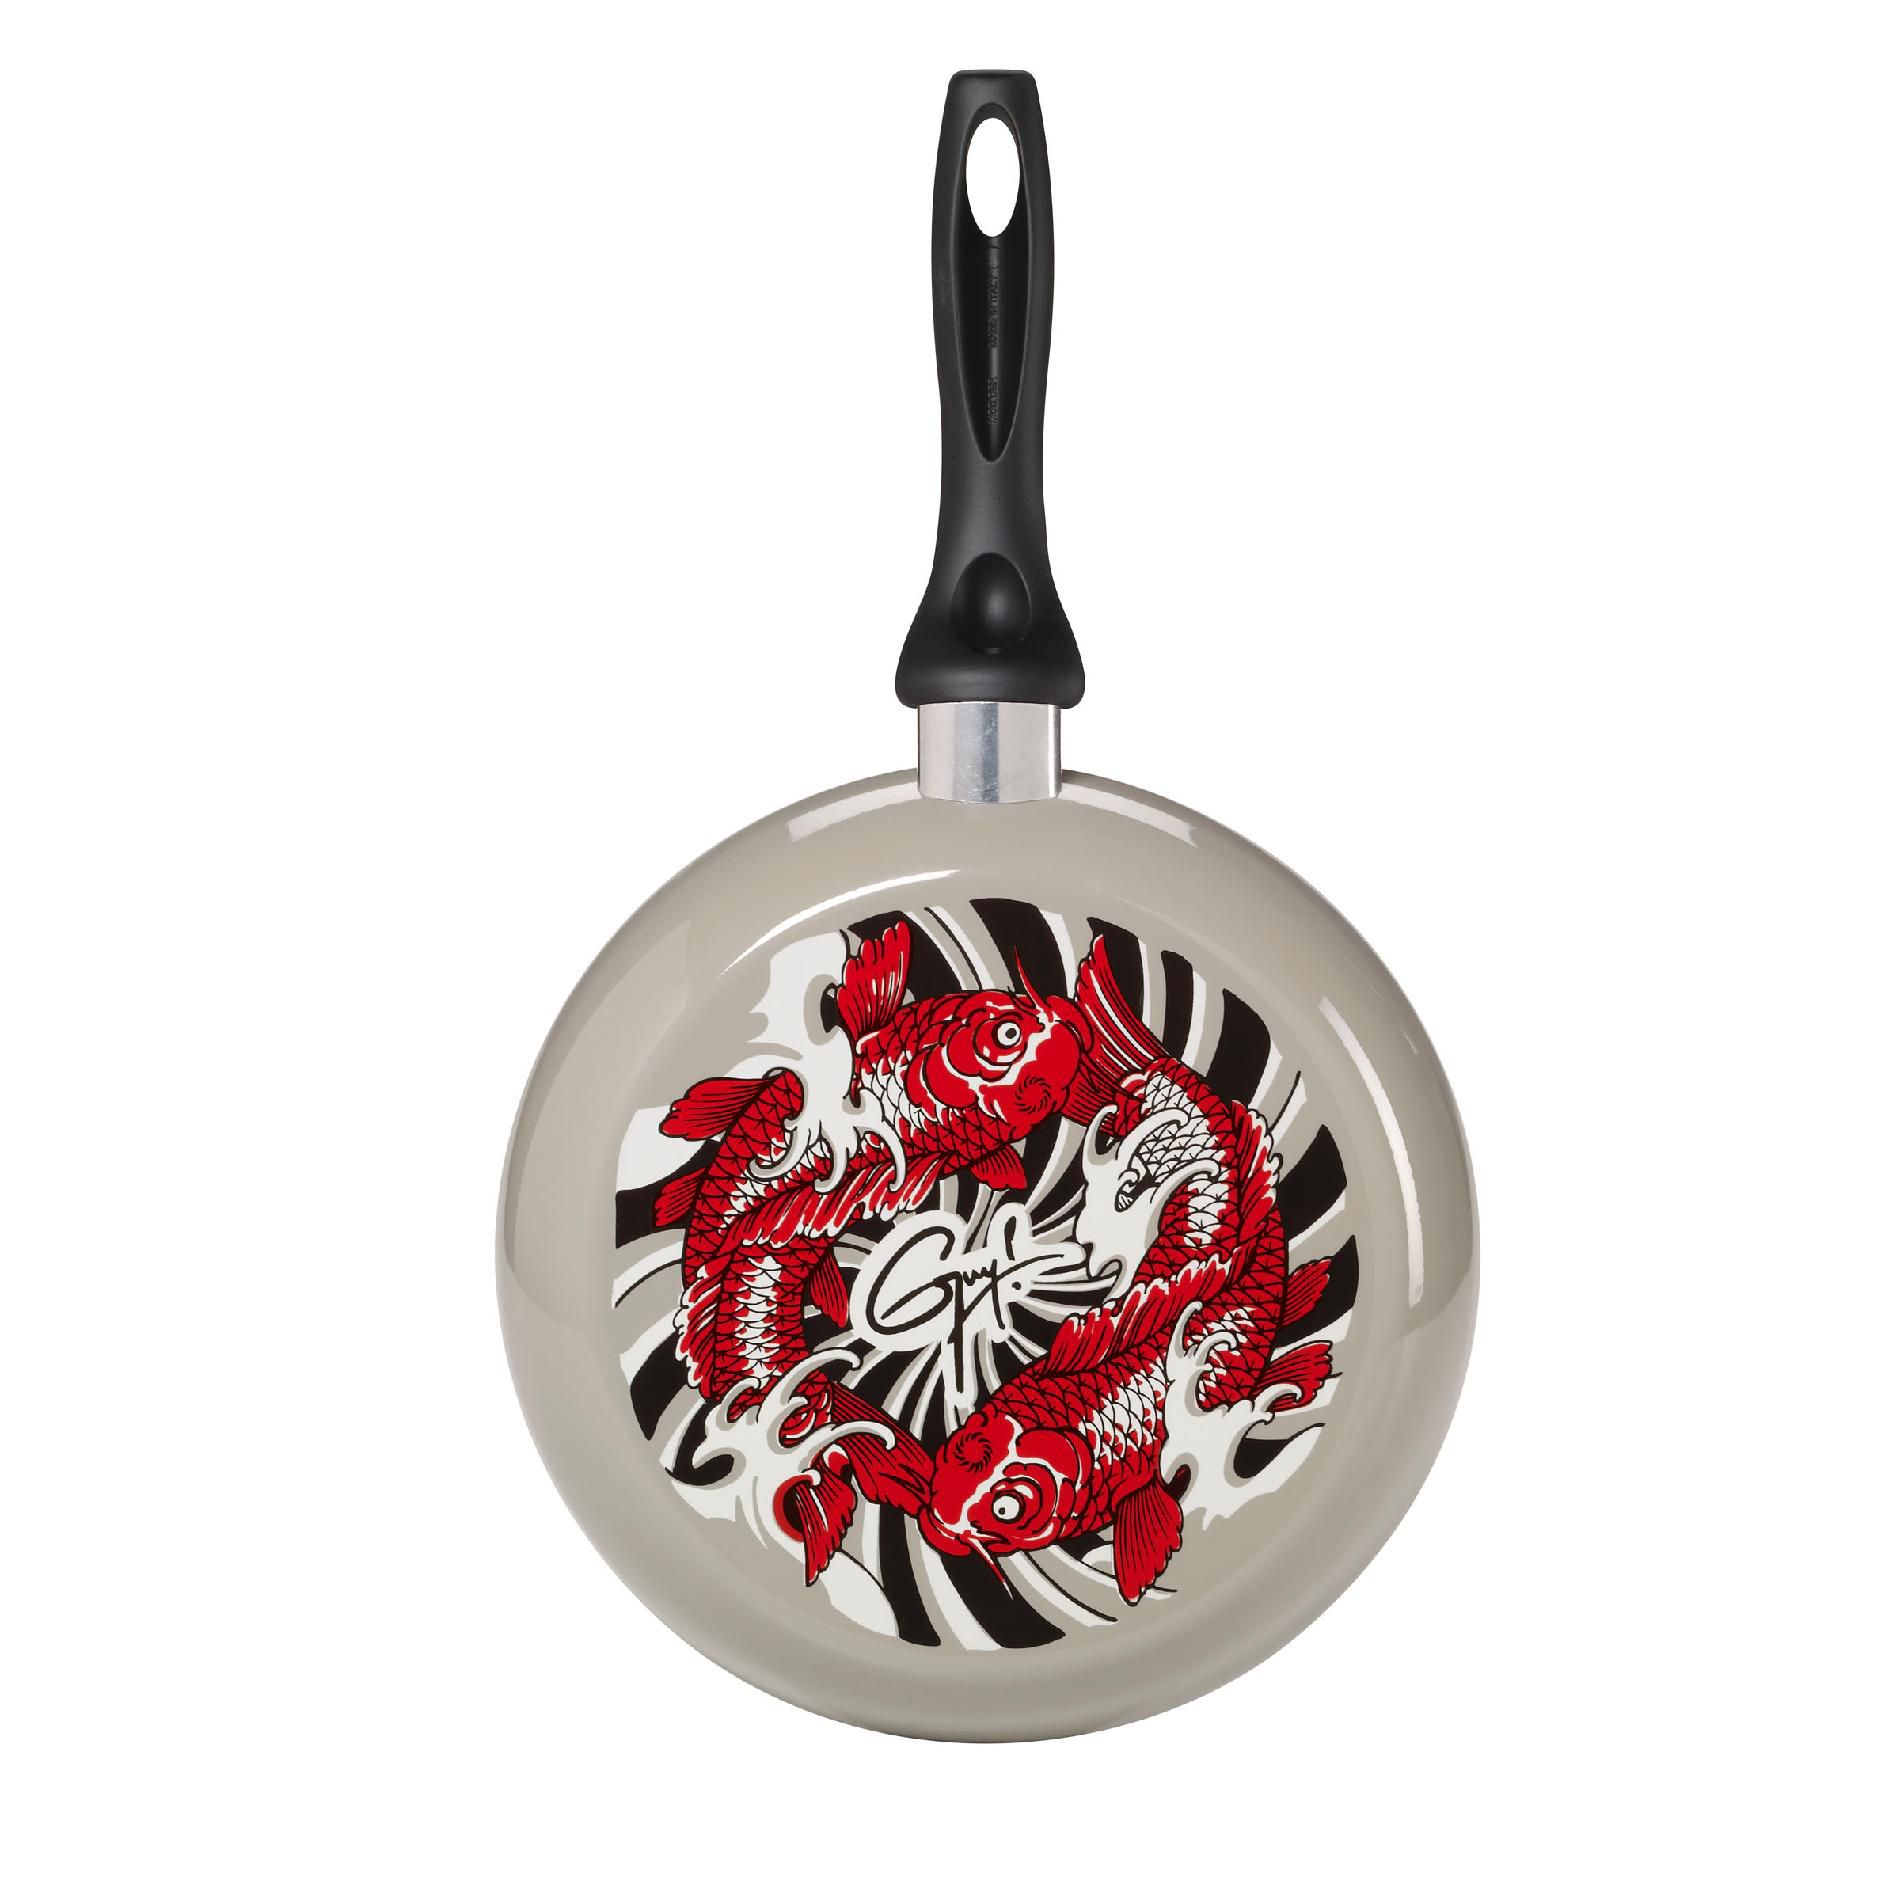 Guy Fieri 10 Inch Decorated Skillet with Koi Fish